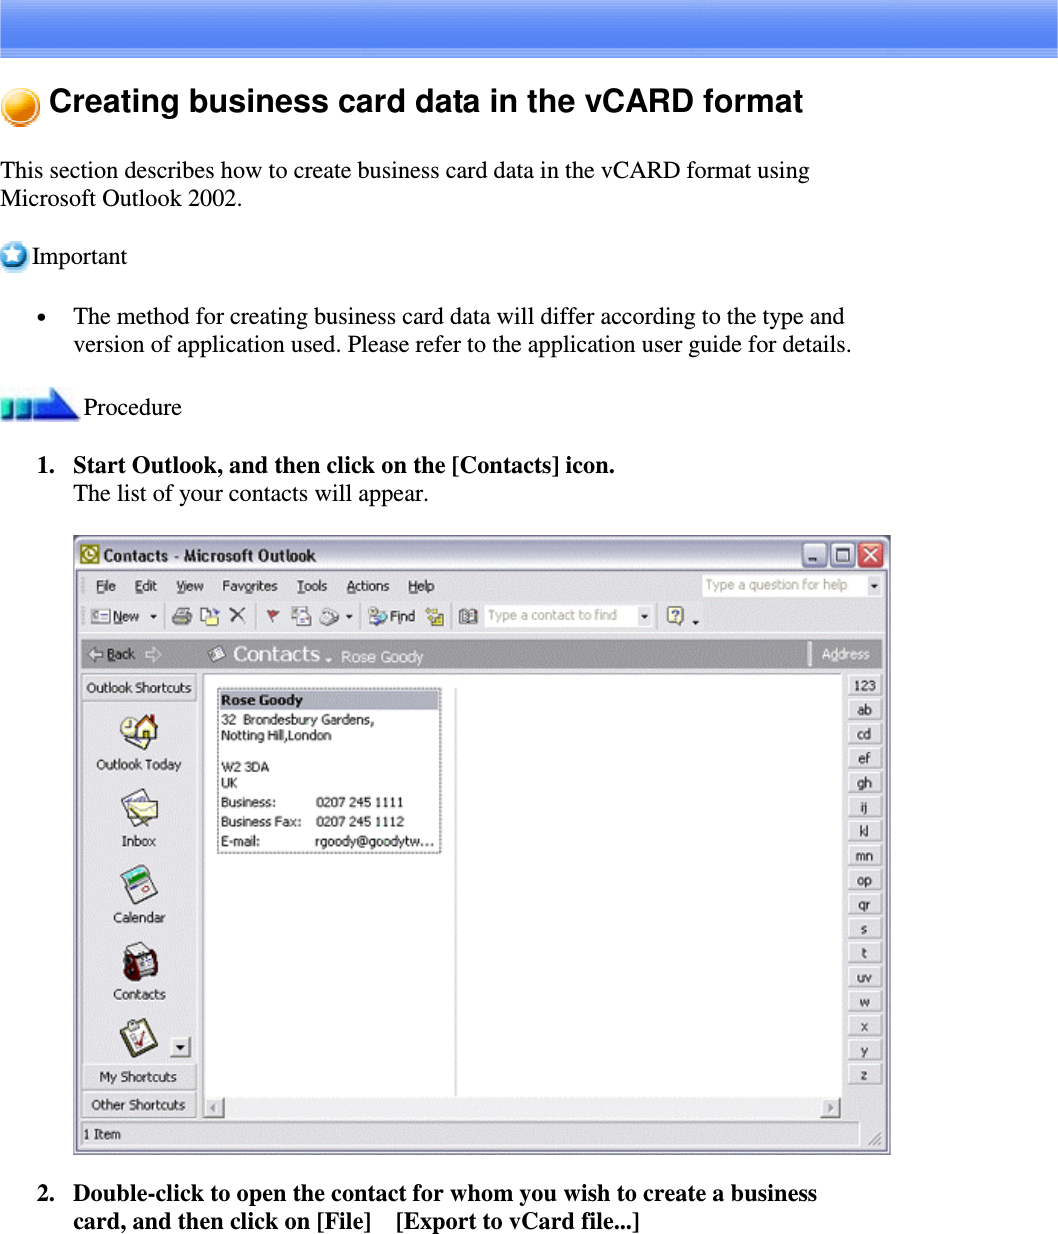 Creating business card data in the vCARD formatThis section describes how to create business card data in the vCARD format usingMicrosoft Outlook 2002.Important•  The method for creating business card data will differ according to the type andversion of application used. Please refer to the application user guide for details.Procedure1. Start Outlook, and then click on the [Contacts] icon.The list of your contacts will appear.2. Double-click to open the contact for whom you wish to create a businesscard, and then click on [File][Export to vCard file...]